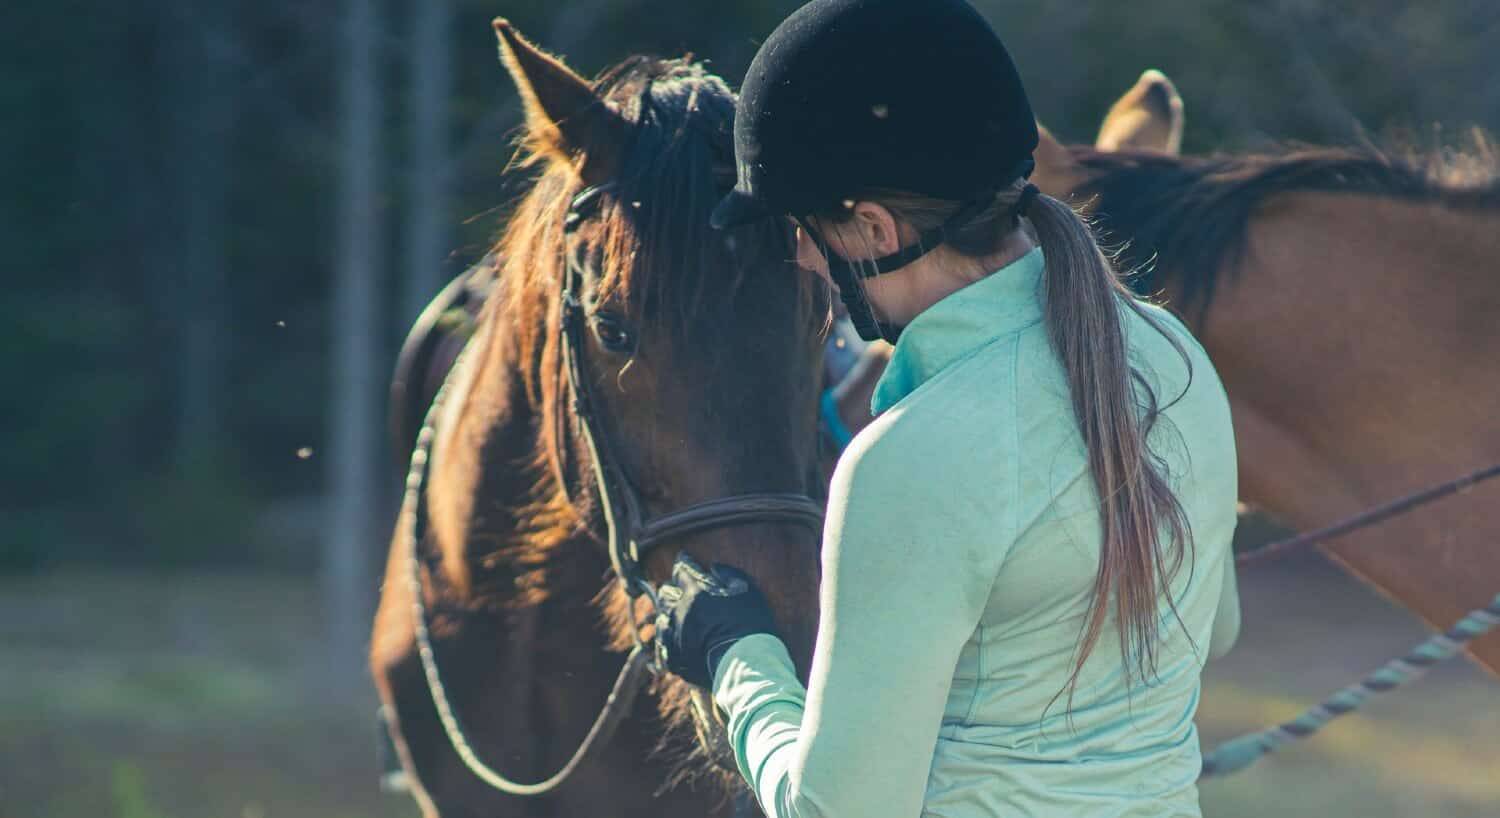 A woman in a green shirt and black helmet petting the face of a brown horse